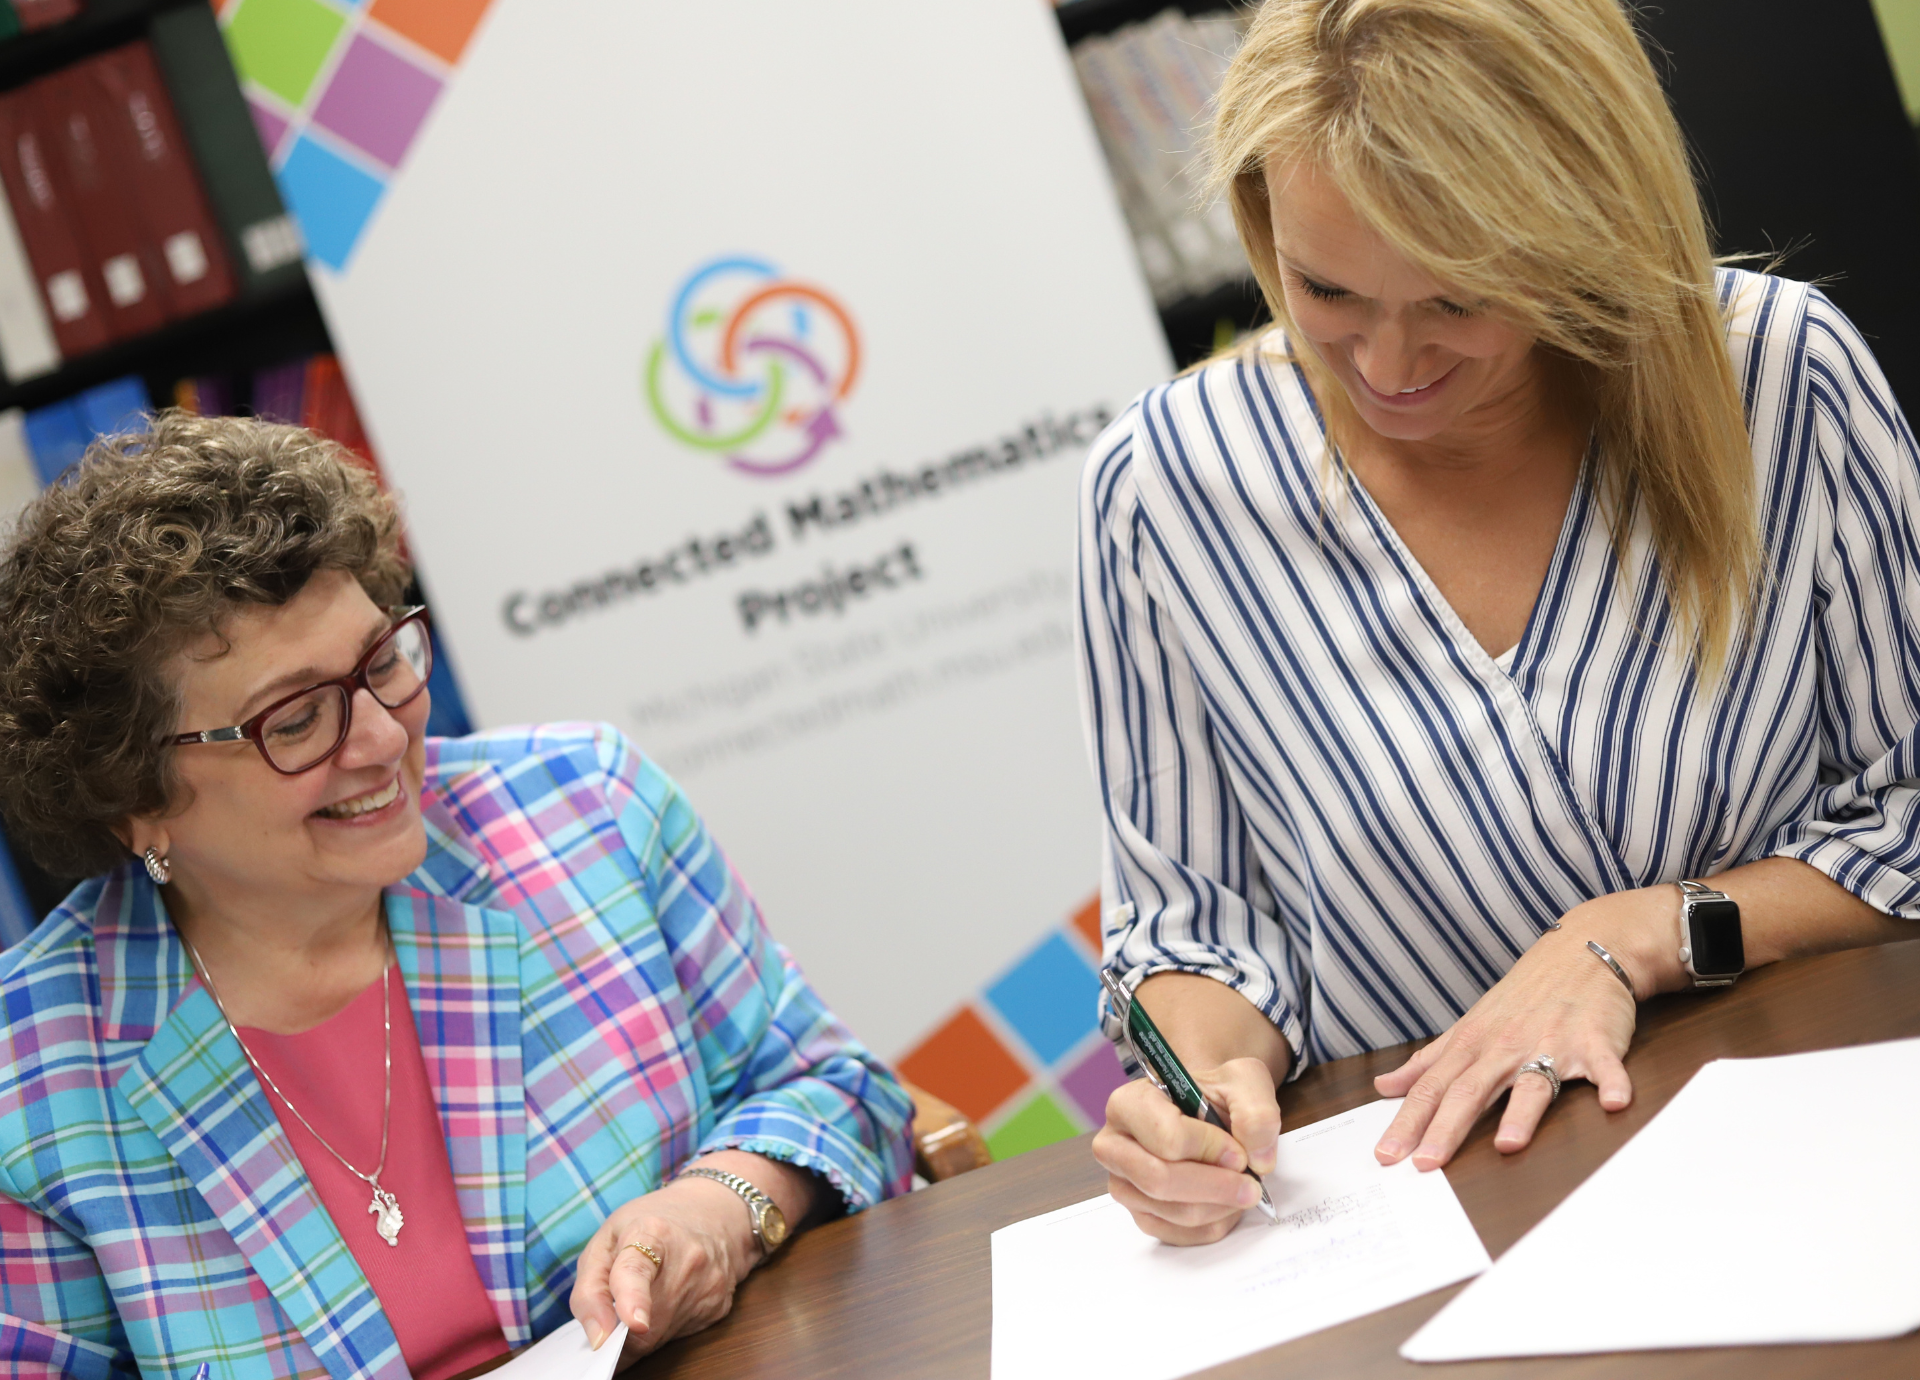 Anne Di Sante (left), Executive Director of MSU Technologies, and Lisa Kelp (right), VP of Learning and Development at Lab-Aids sign the partnership agreement for Lab-Aids to publish the next edition from Connected Mathematics Project at Michigan State University.